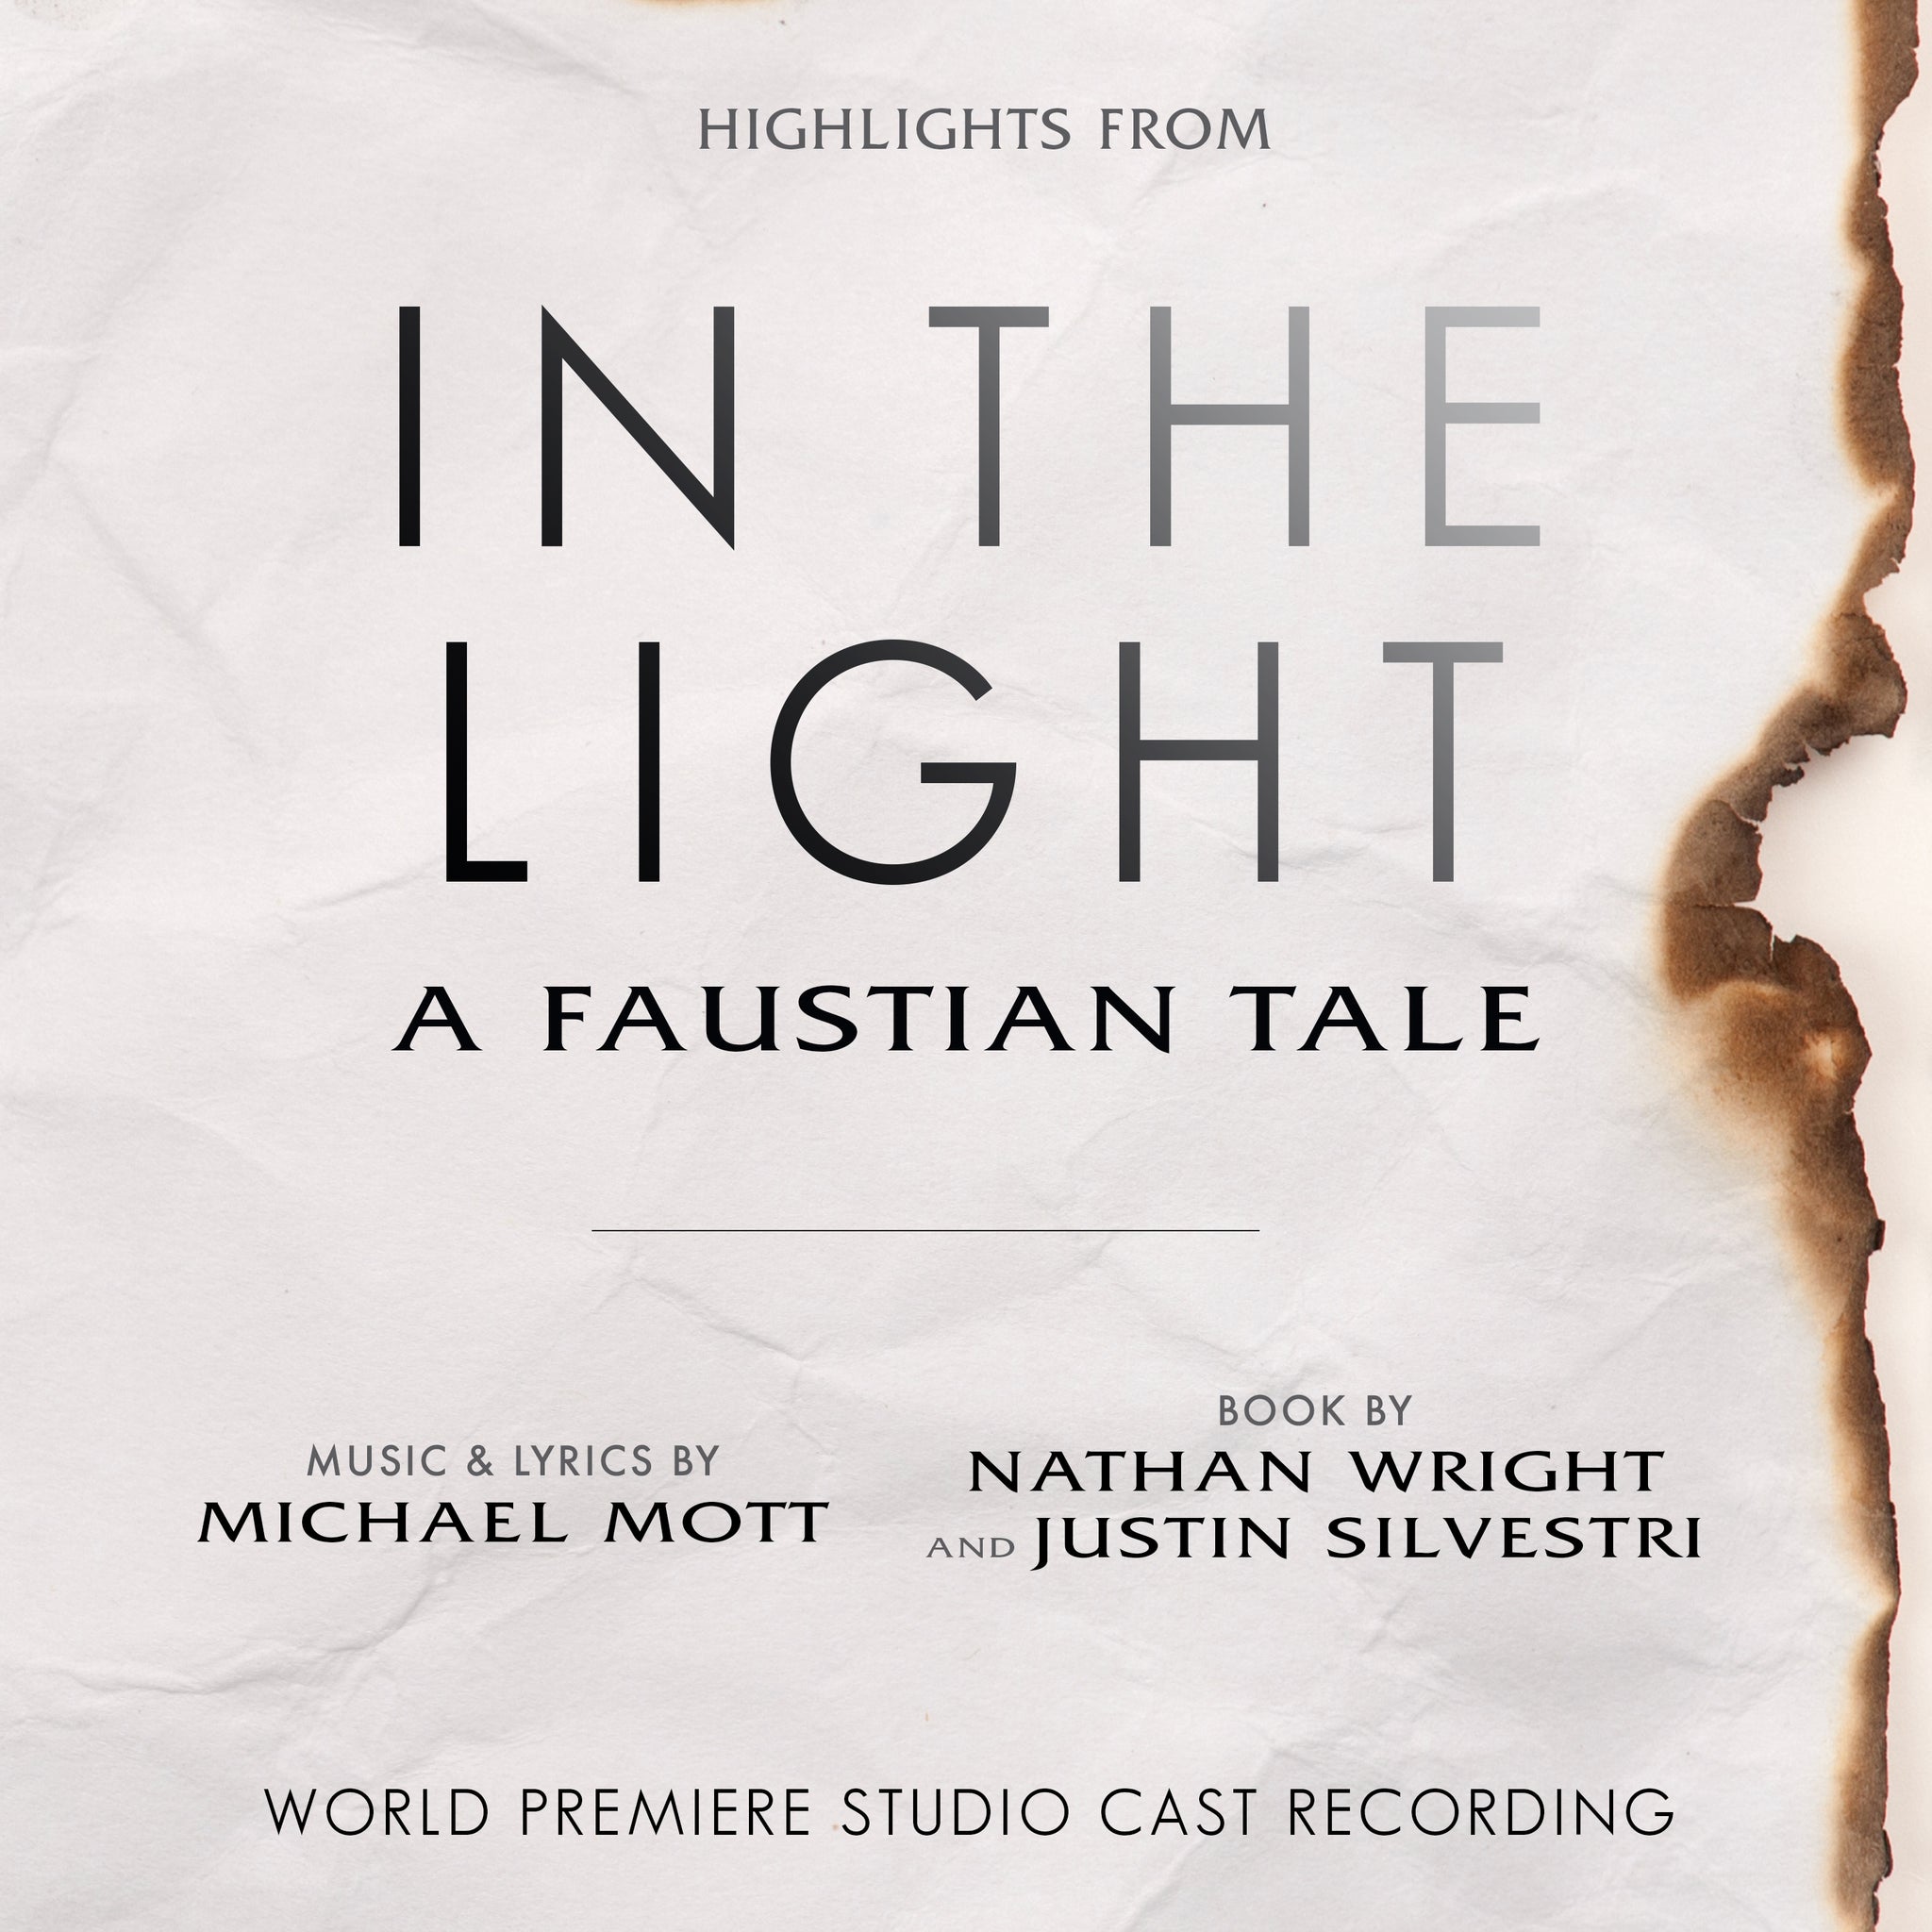 In The Light (Highlights from the World Premiere Studio Cast Recording) [CD]